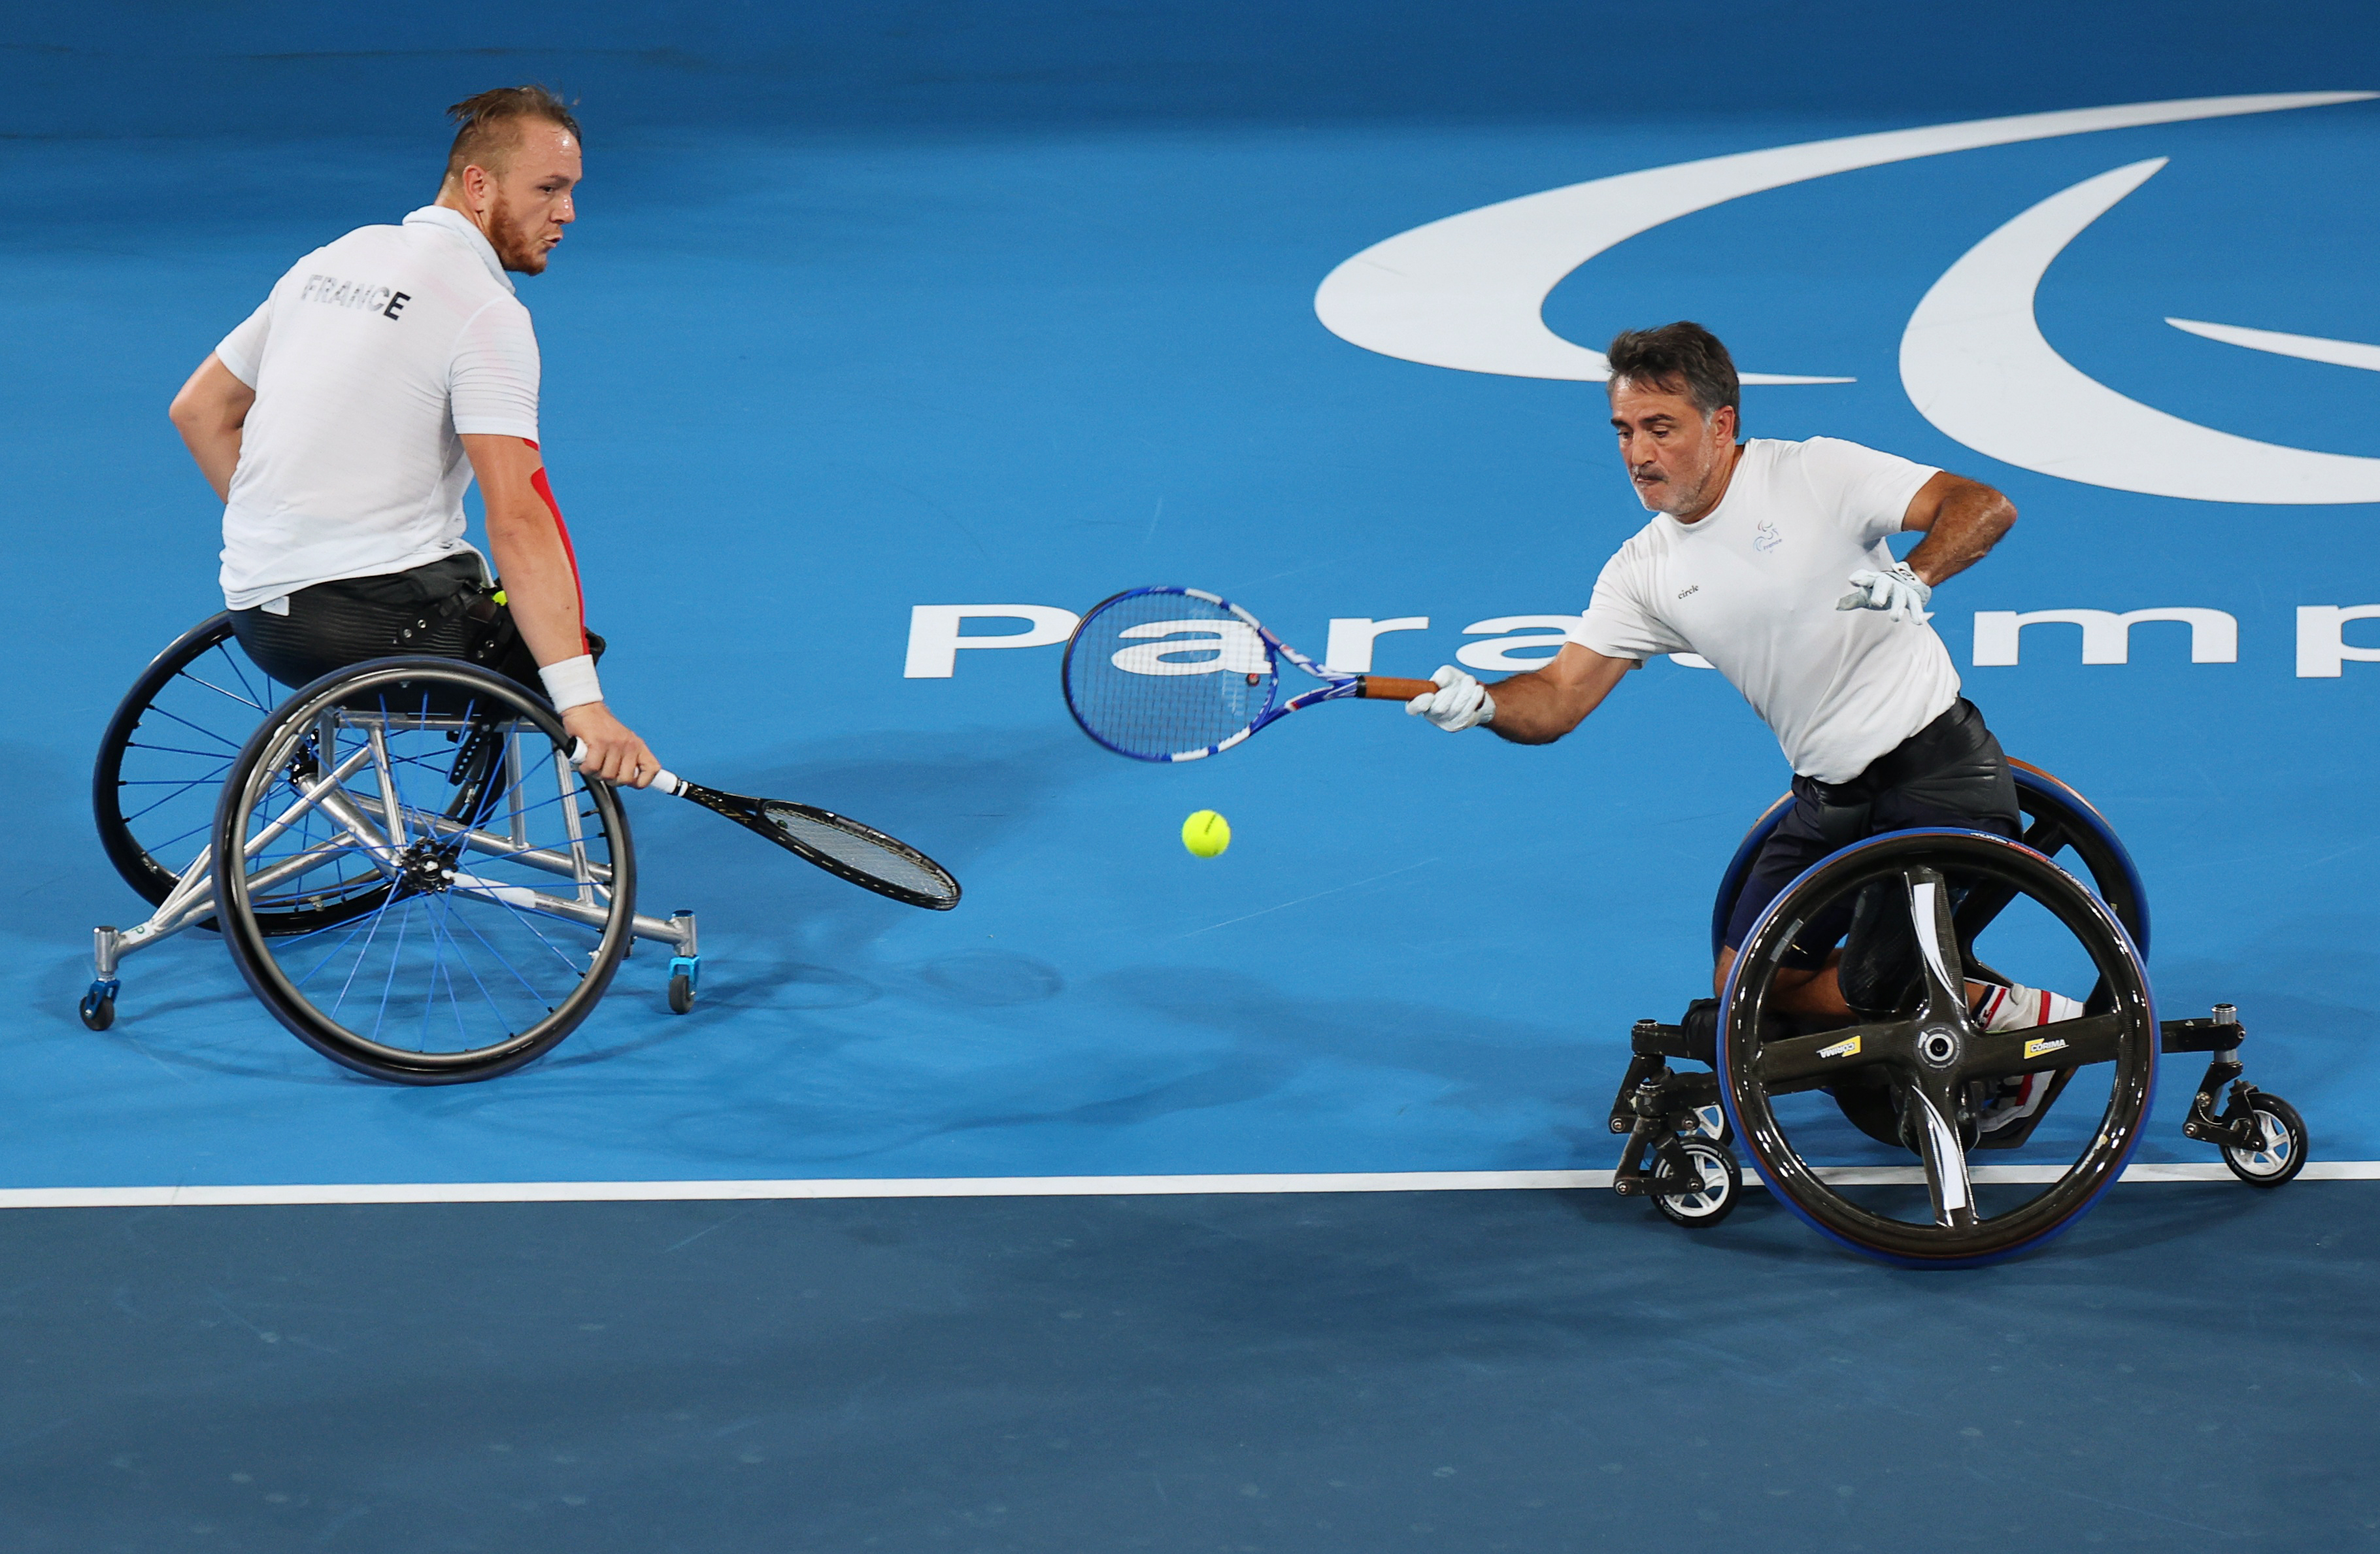 Tokyo 2020 Paralympic Games - Wheelchair Tennis - Men's Doubles Gold Medal Match -  Ariake Tennis Park, Tokyo, Japan - September 3, 2021. Stephane Houdet of France in action during the match with Nicolas Peifer of France against Alfie Hewett of Britain and Gordon Reid of Britain REUTERS/Marko Djurica